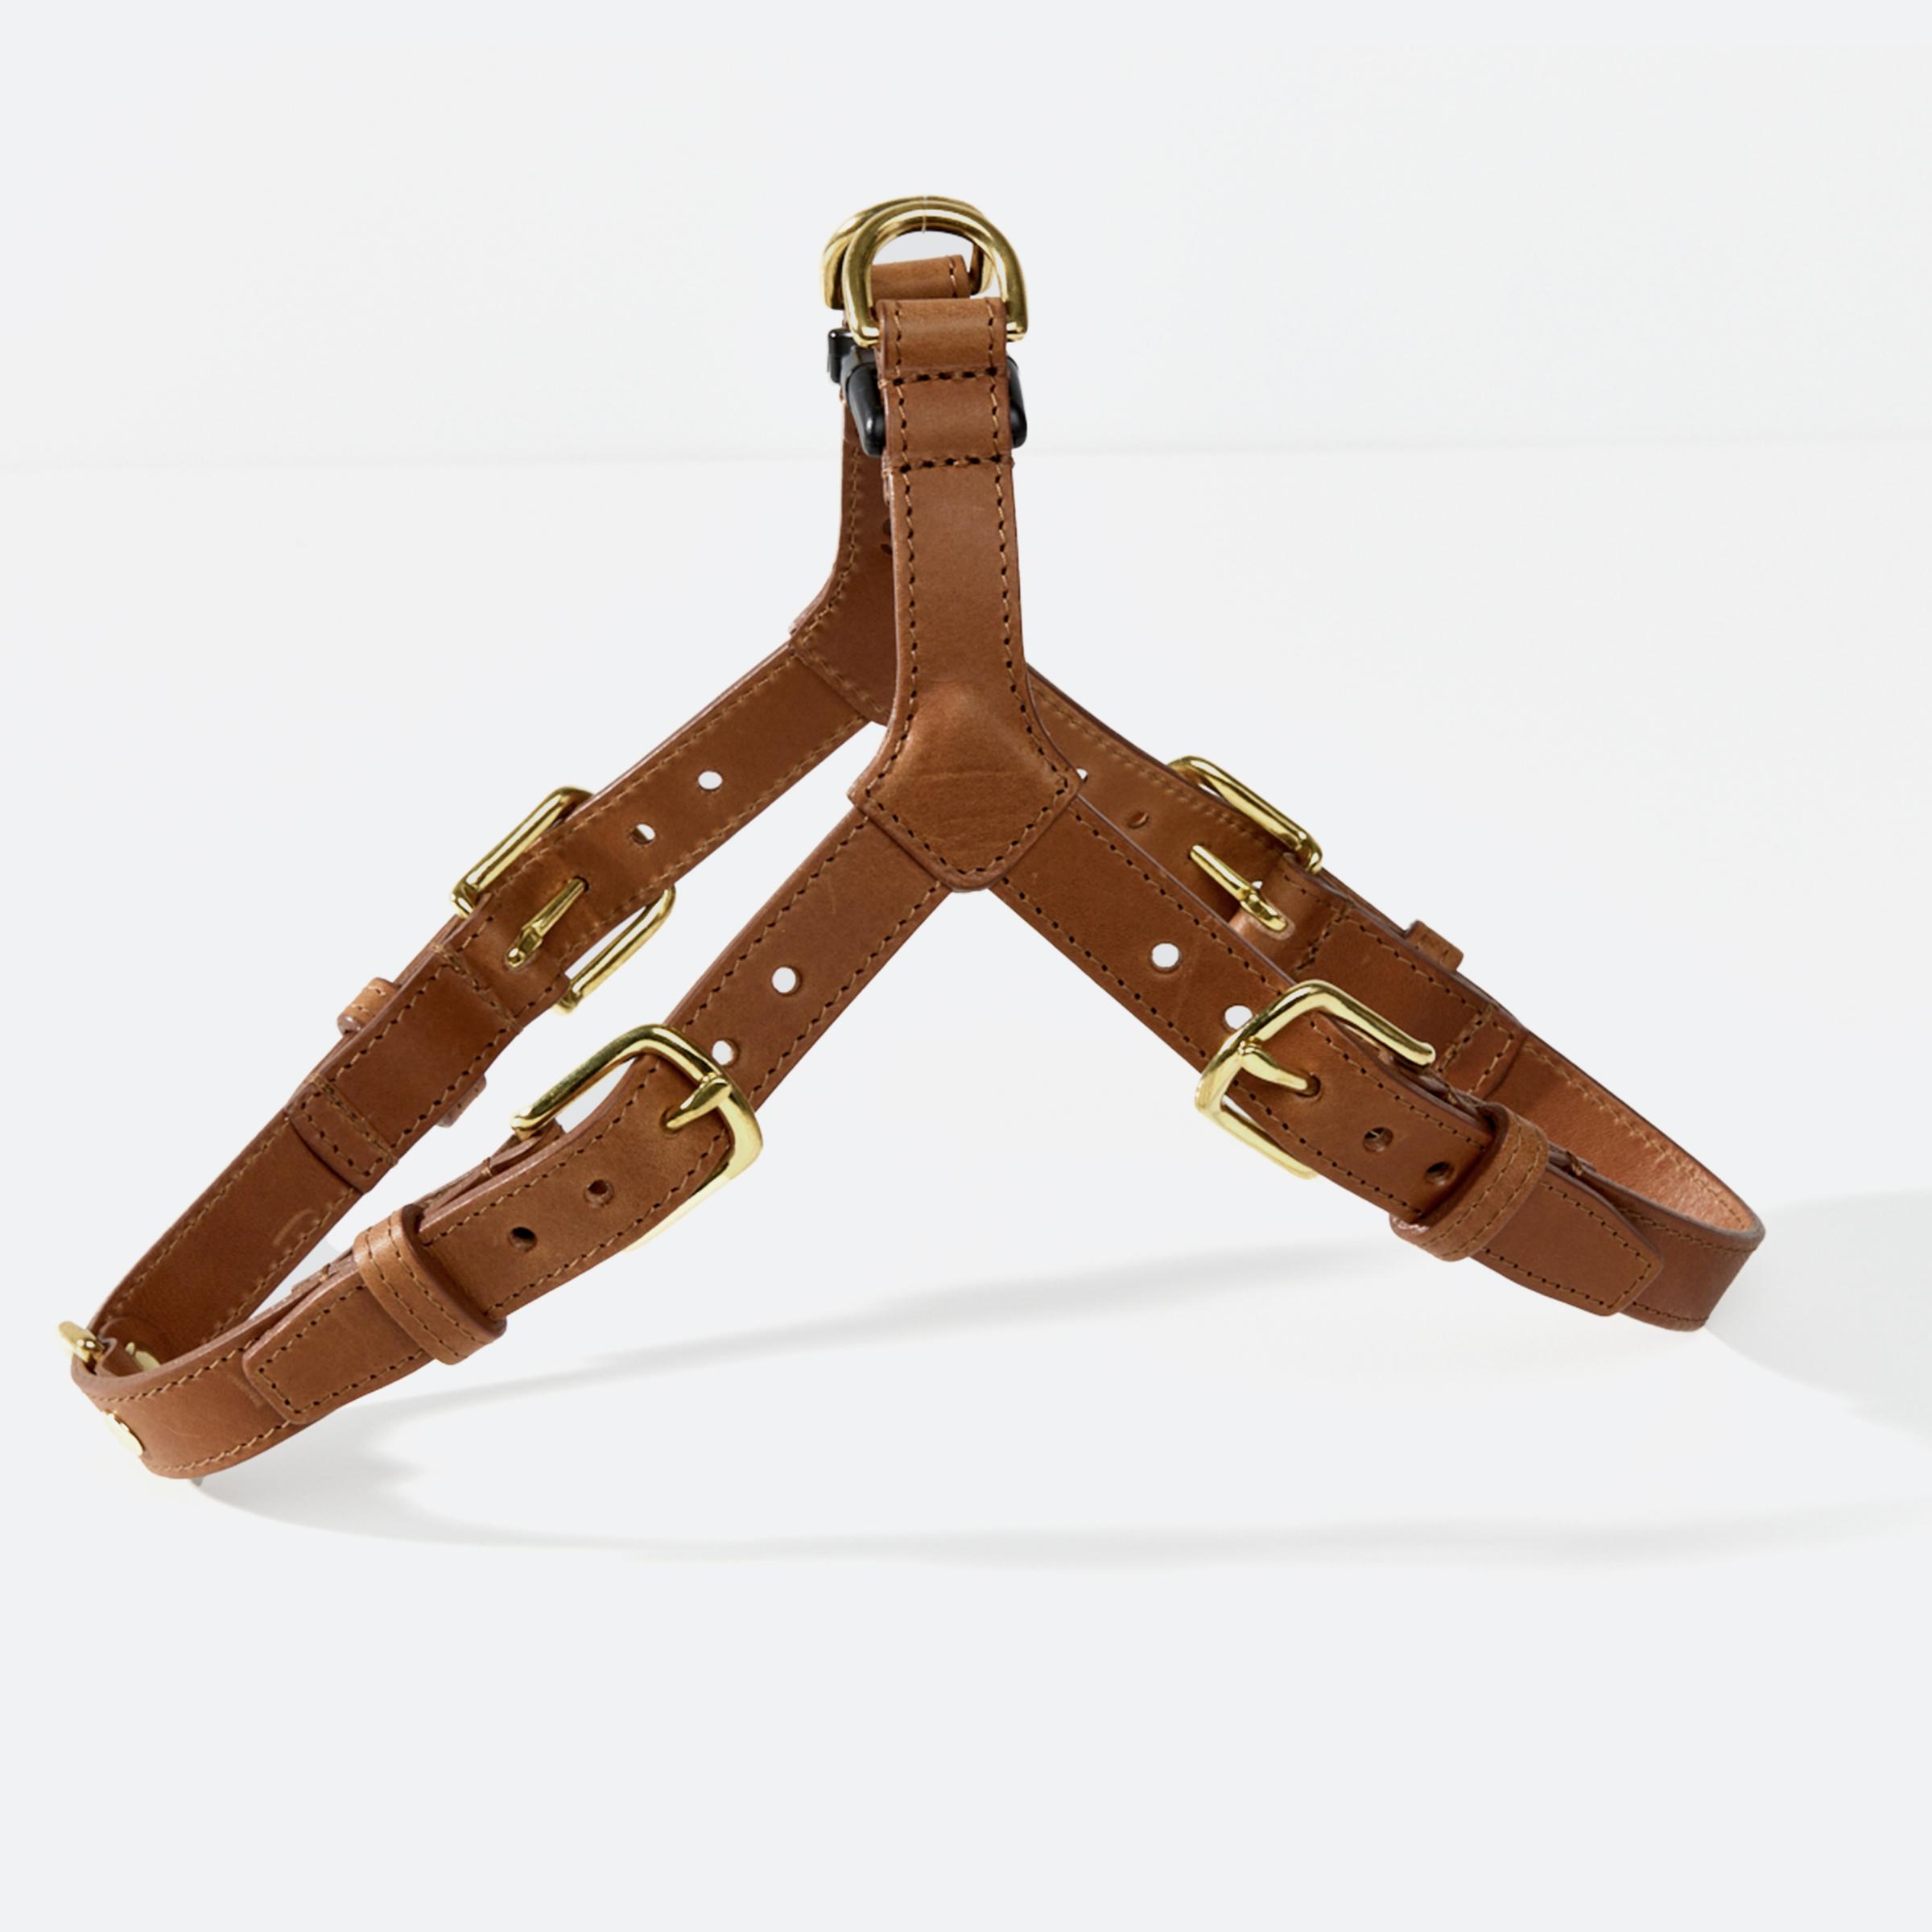 One-click Leather Dog Harness – Tan